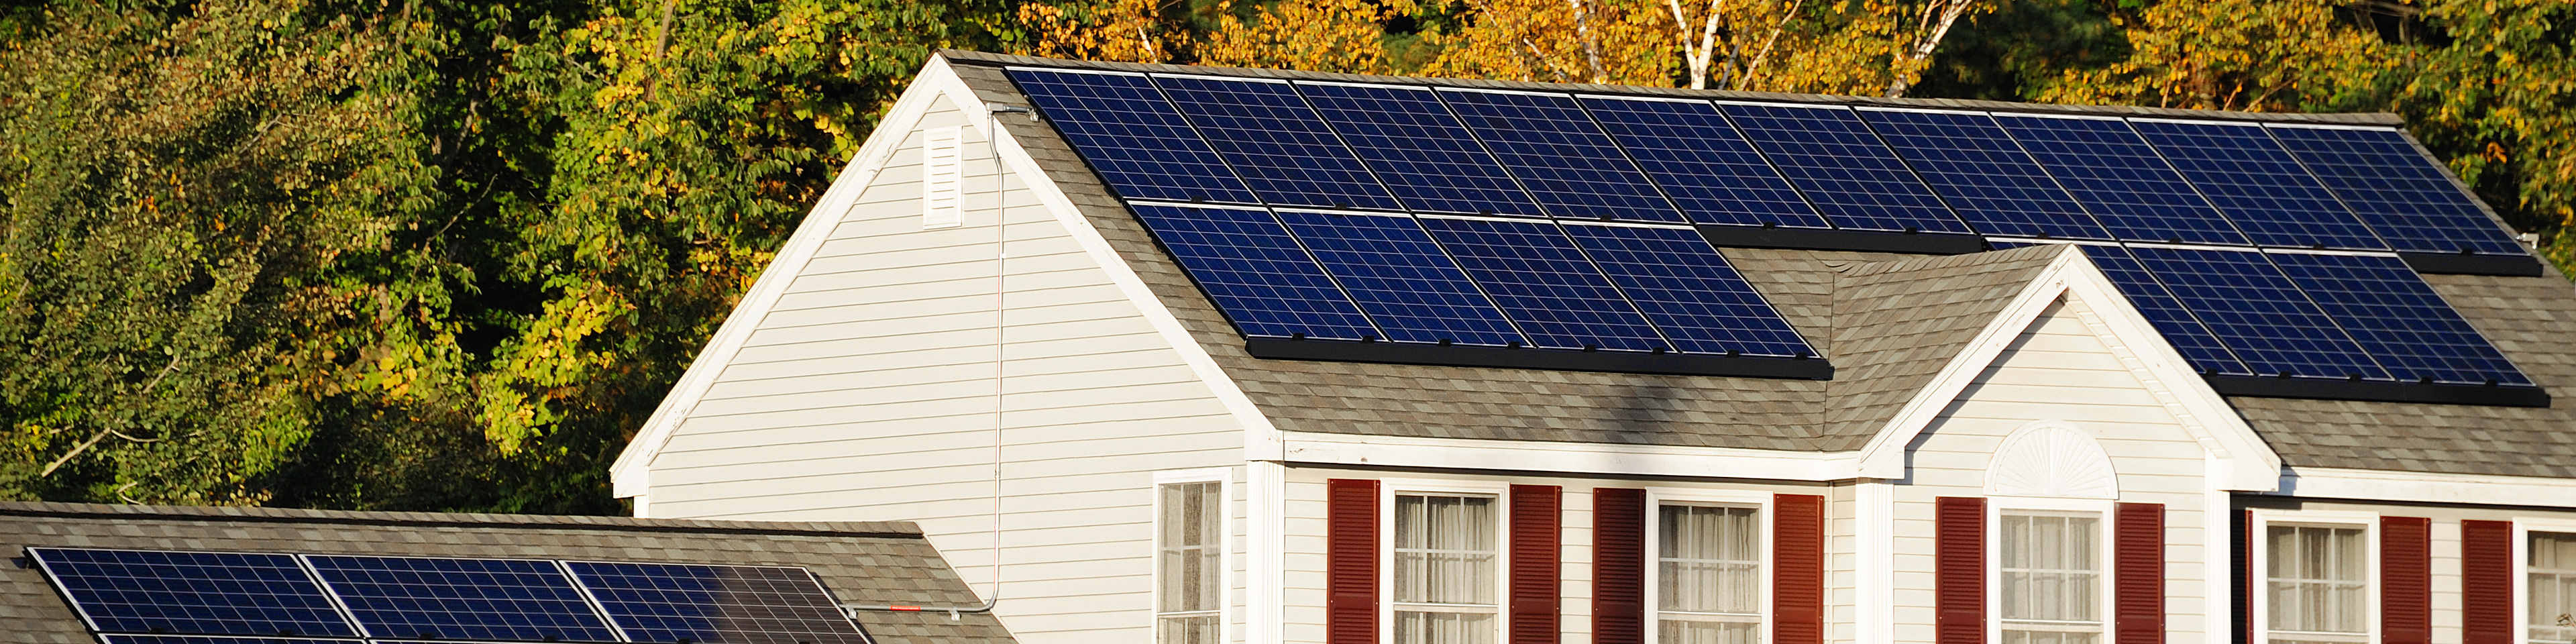 How solar lenders can mitigate risk with fixture filings